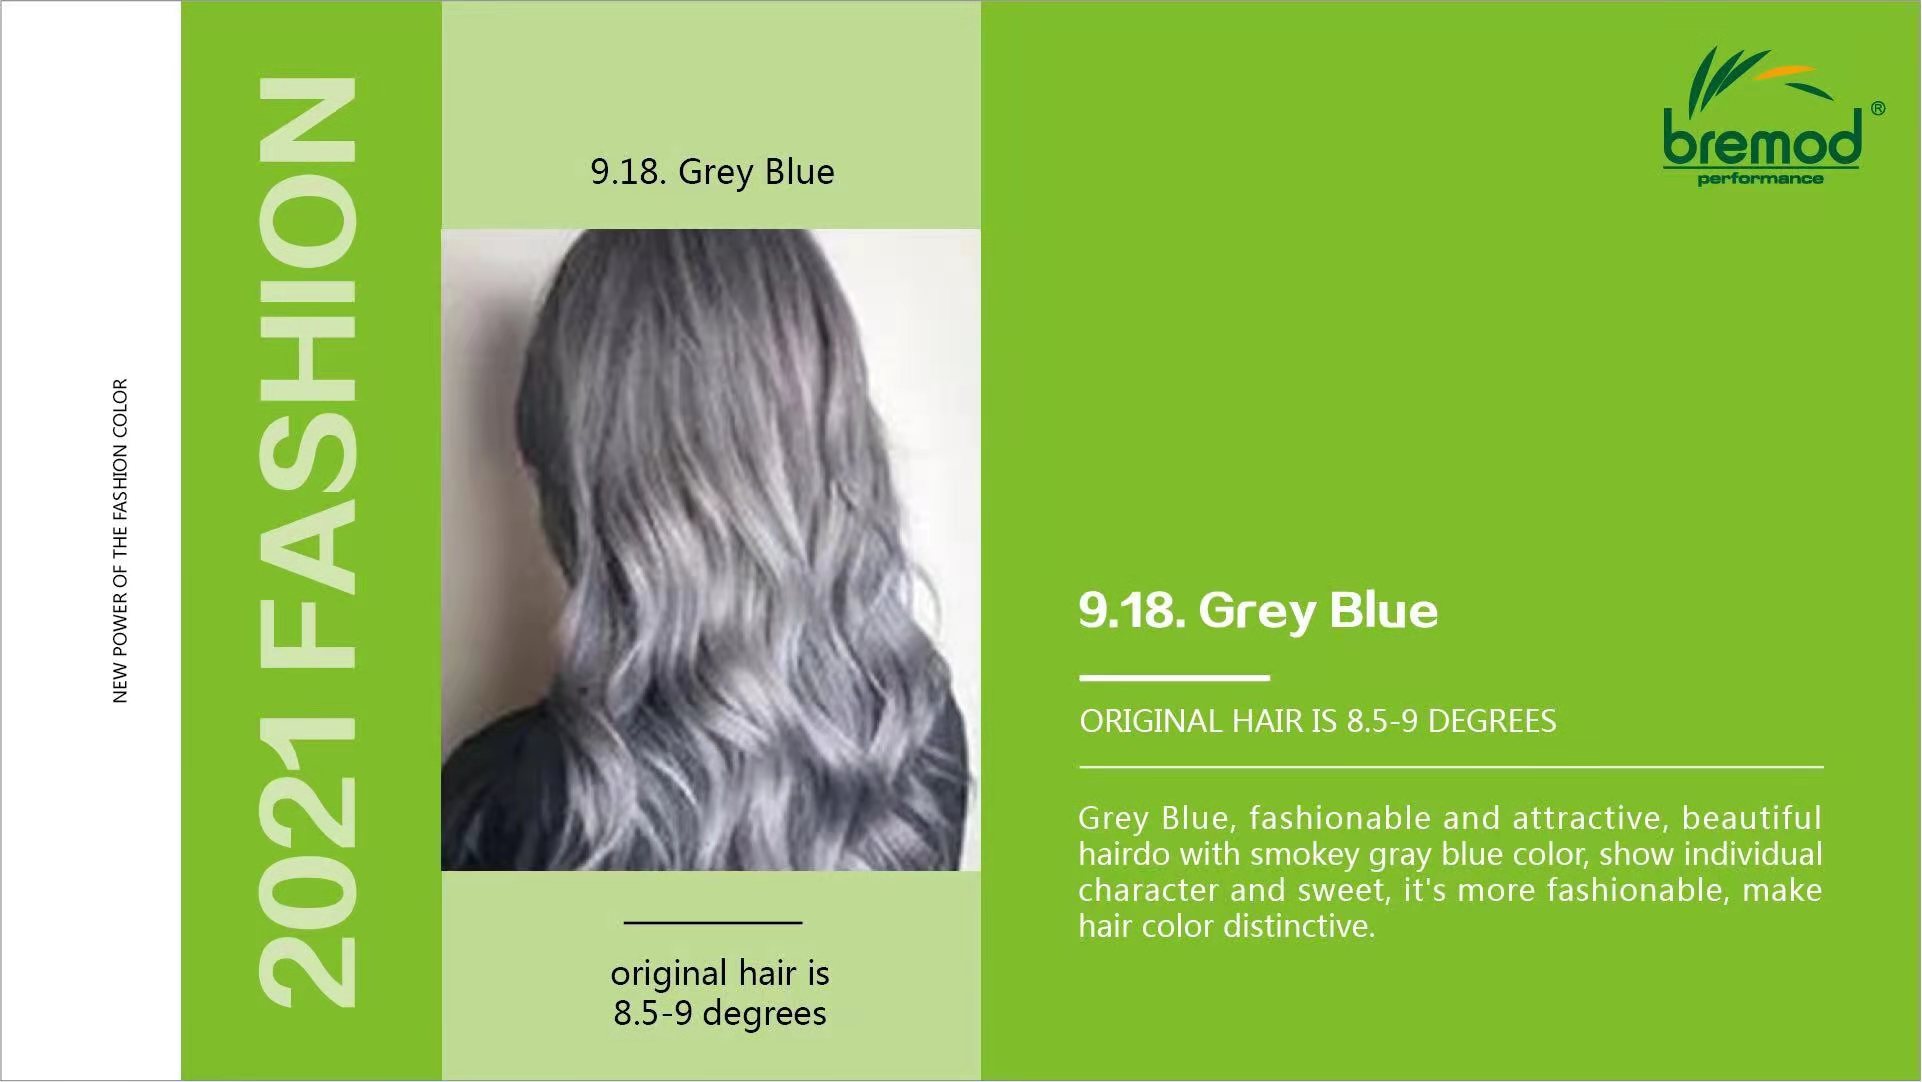 5. "The Psychology Behind Nerdy Grey Blue Hair: Why It's So Popular" - wide 6